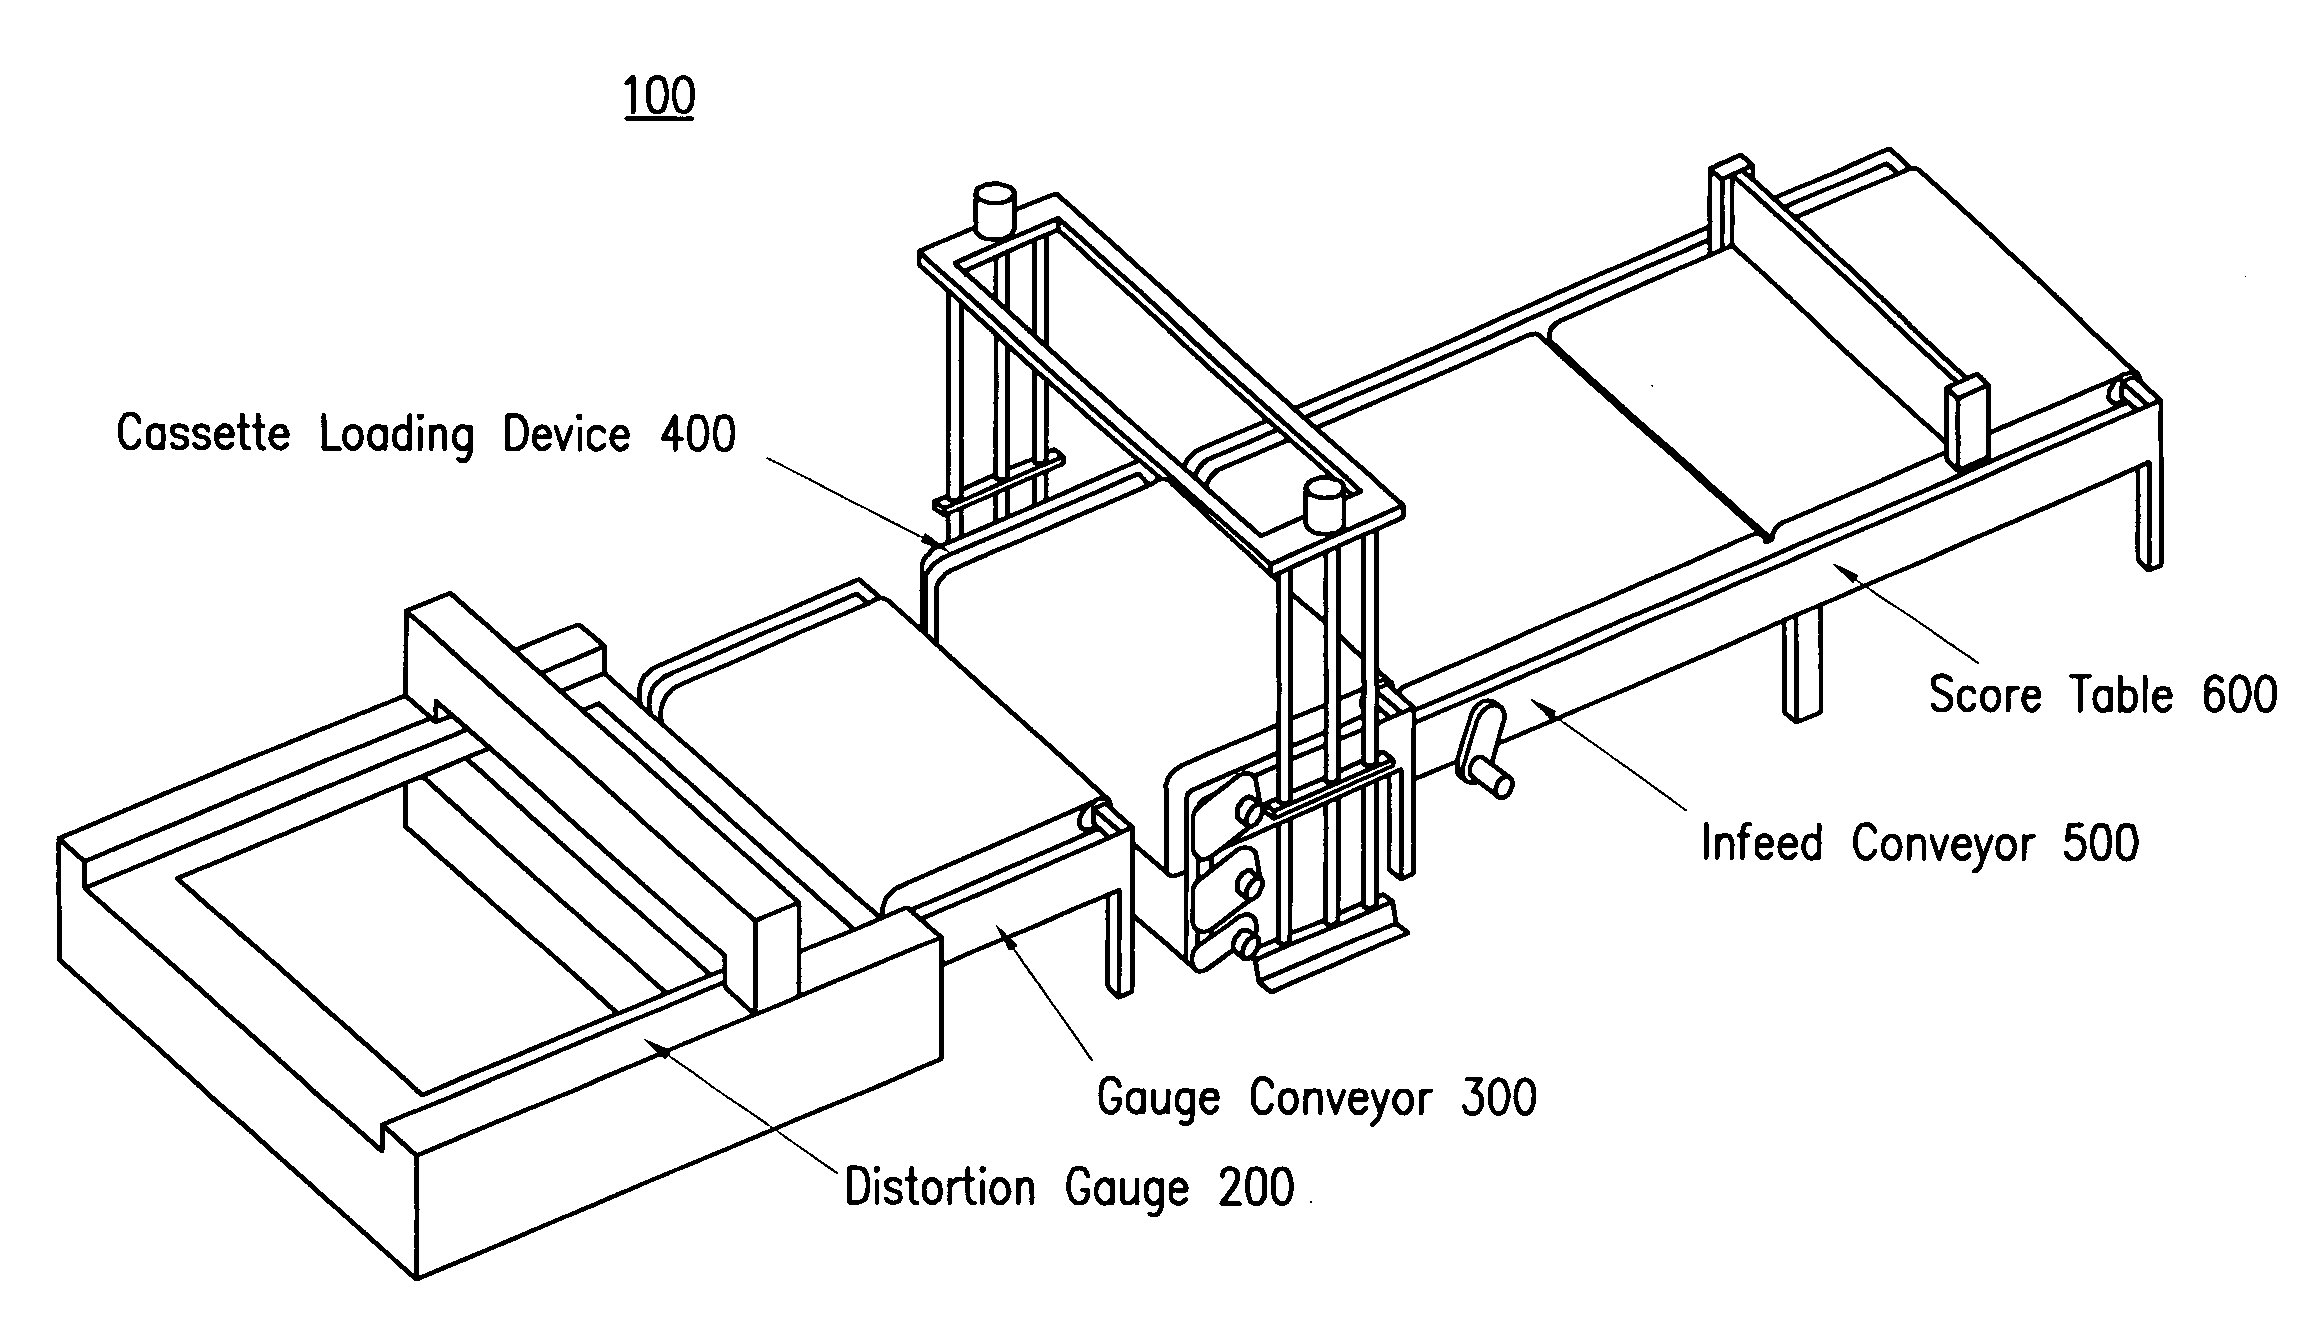 Glass handling and processing system